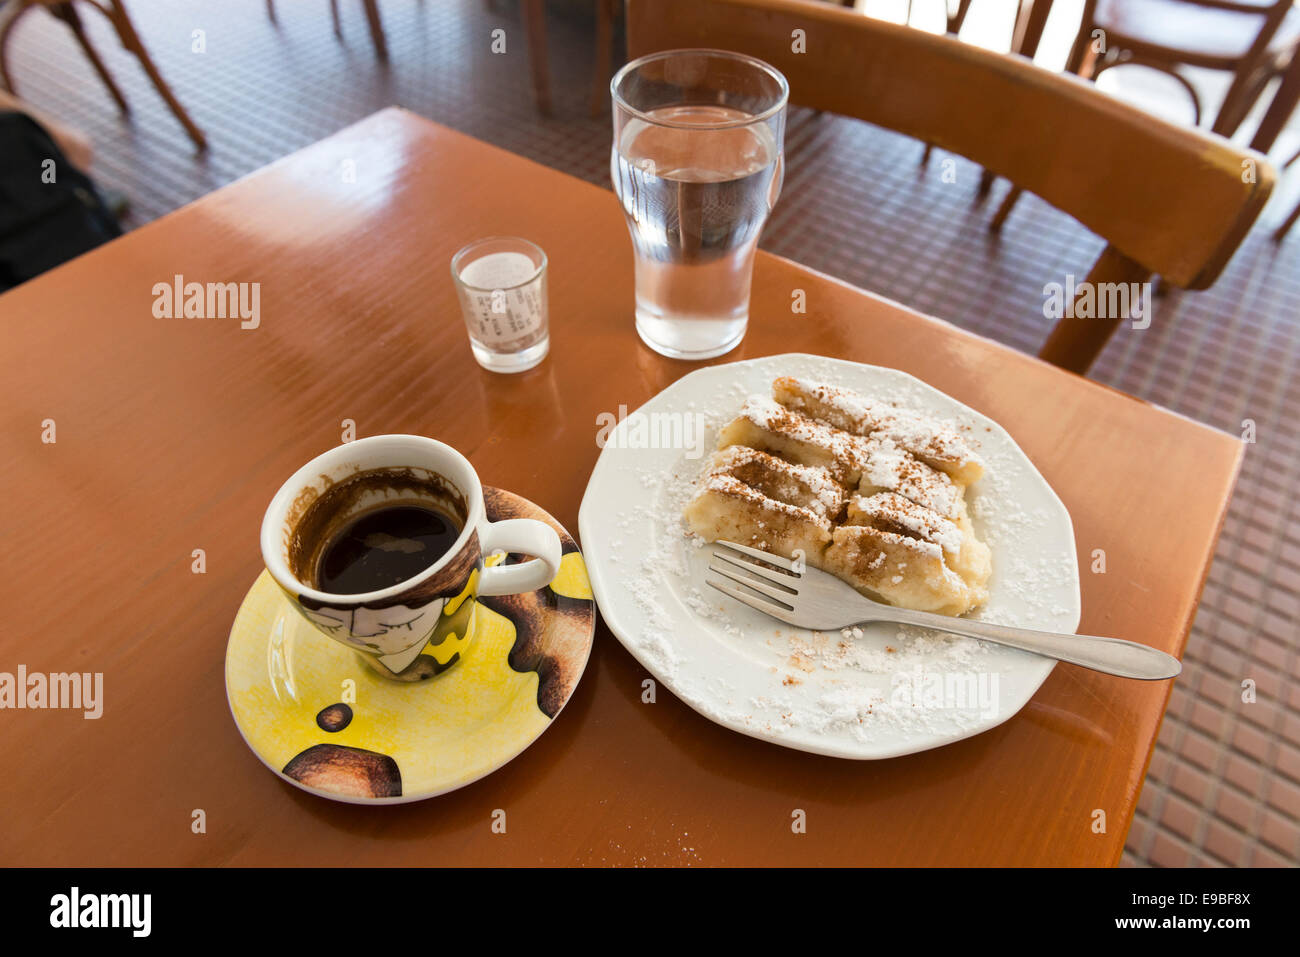 Stilllife of pastry (Baklava)  on plate, cup of Greek coffee a glass of water and the bill in a glass, island of Kos, Greece Stock Photo